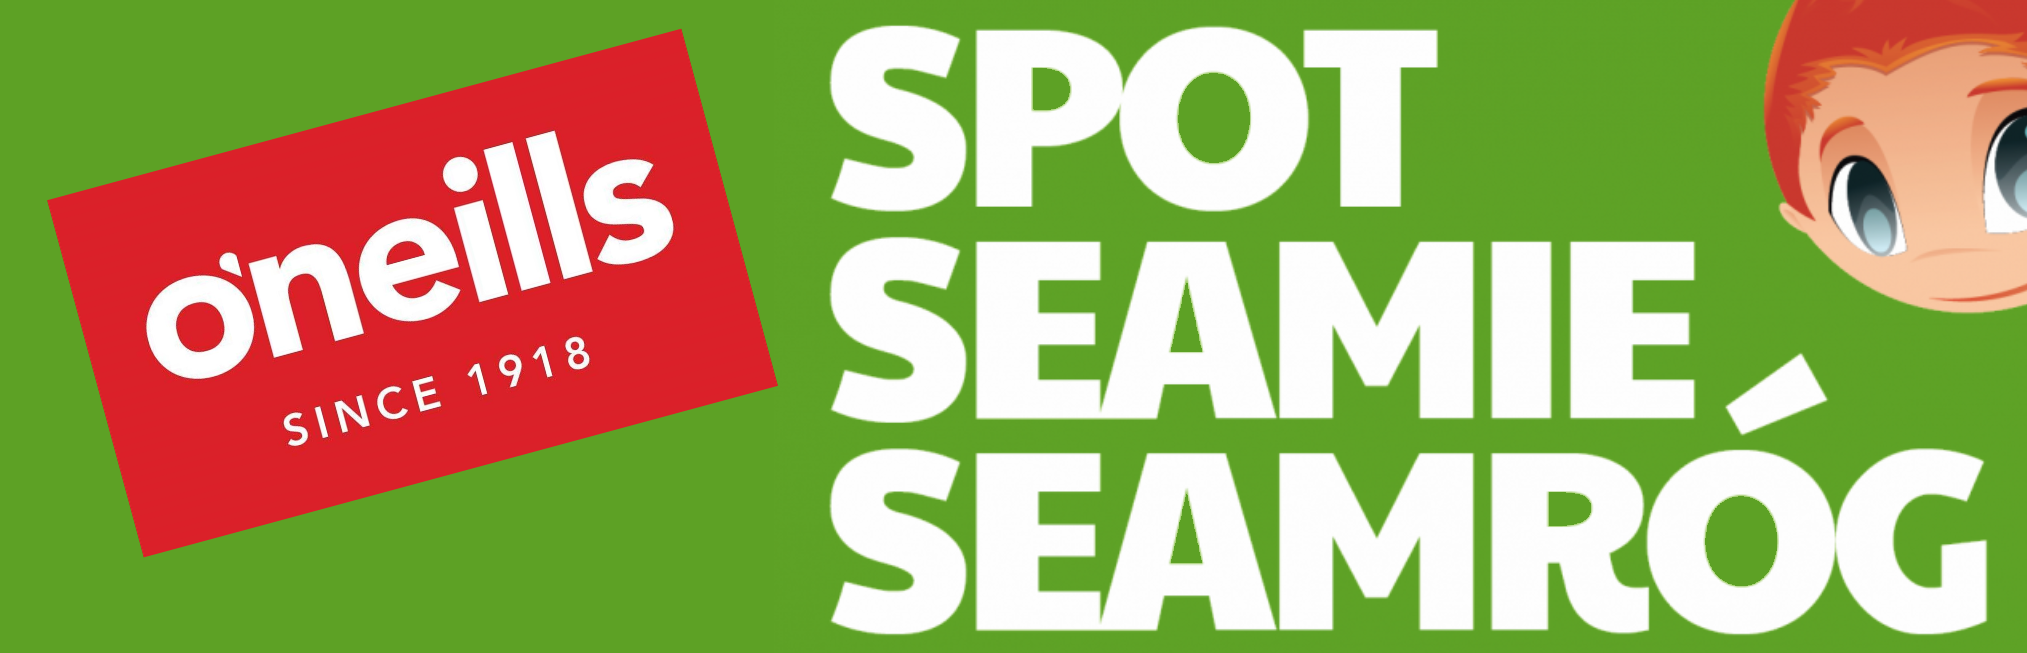 Spot Seamie this October in Issue 125